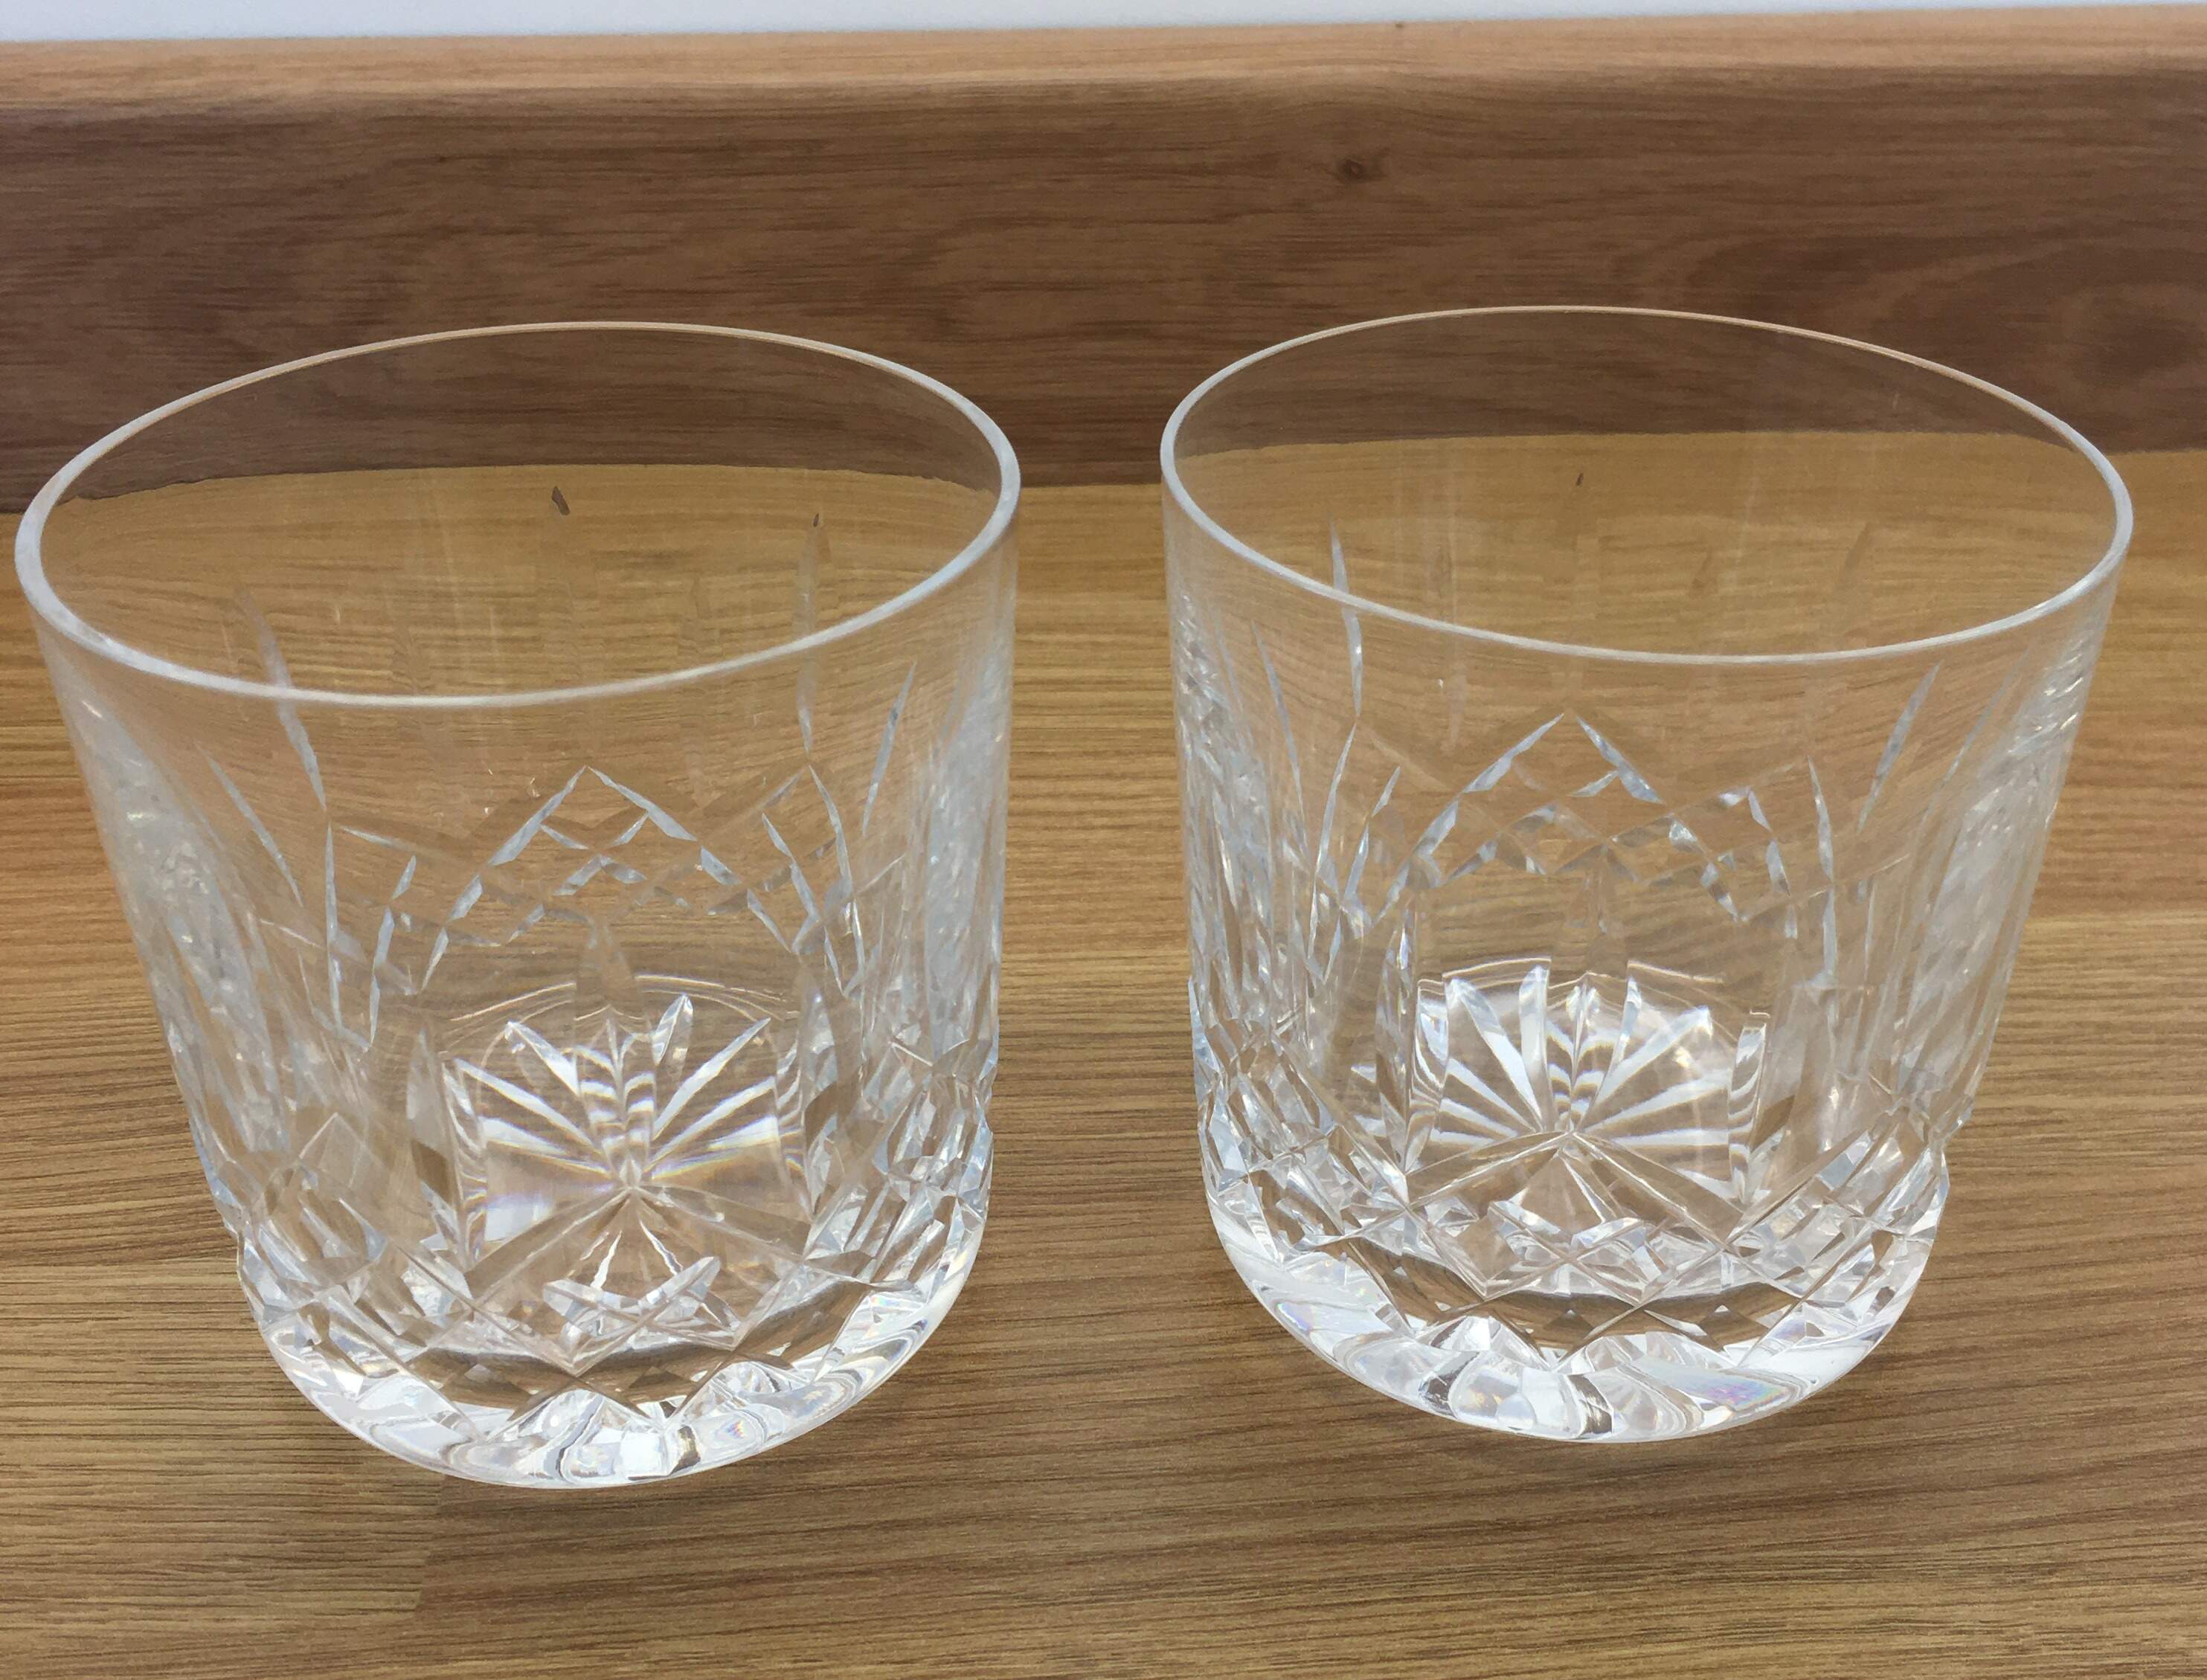 Pair of Waterford Lismore Whisky Tumblers